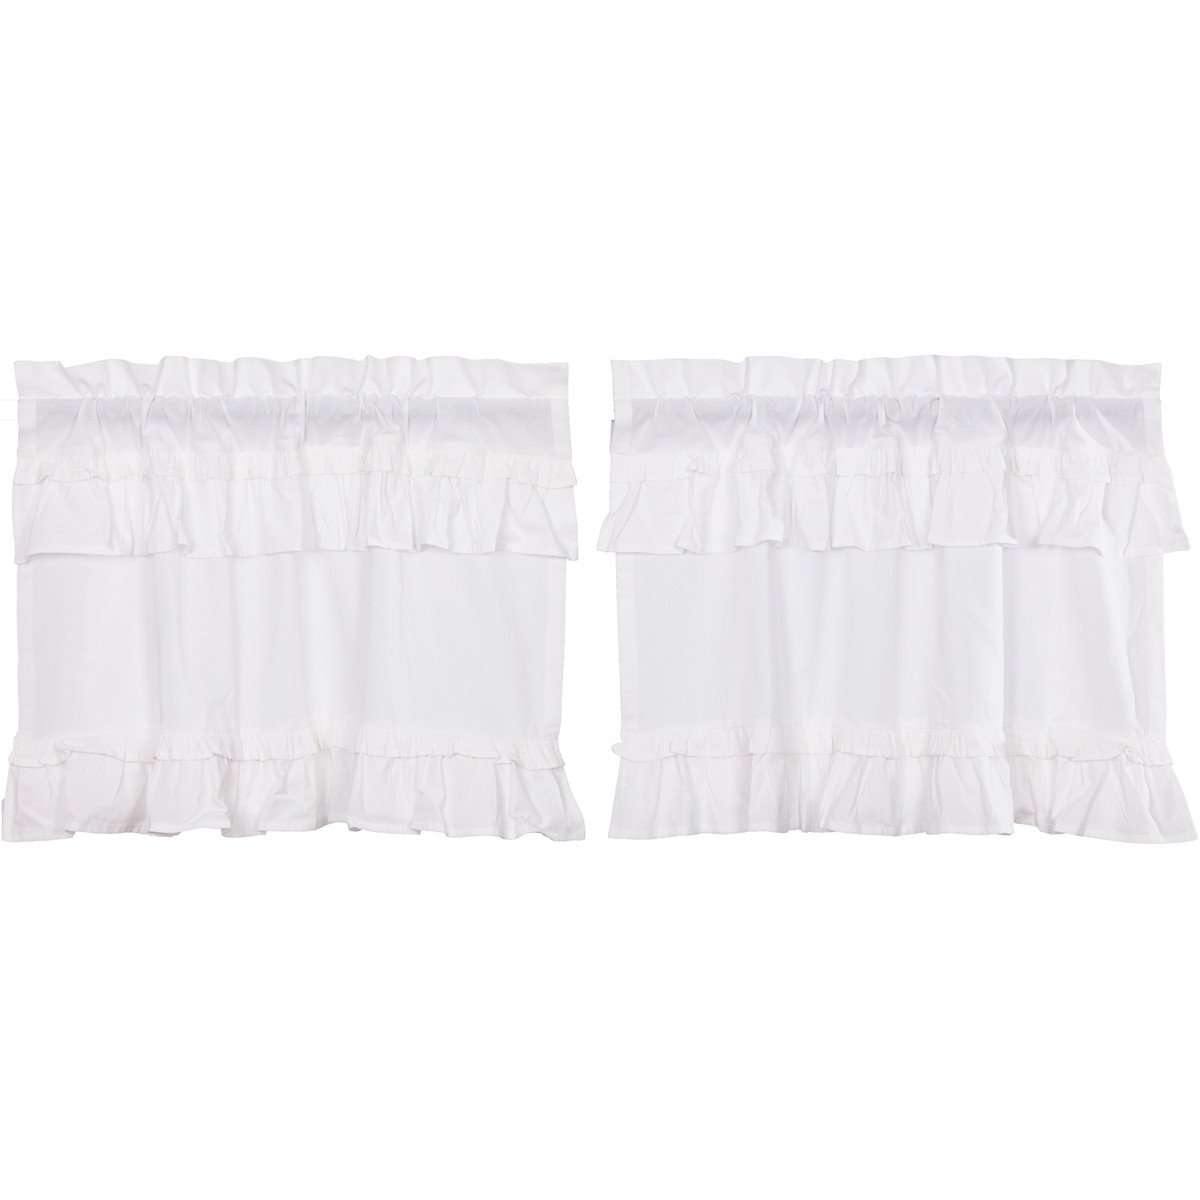 Muslin Ruffled Bleached White Tier Curtain Set of 2 L24xW36 VHC Brands - The Fox Decor